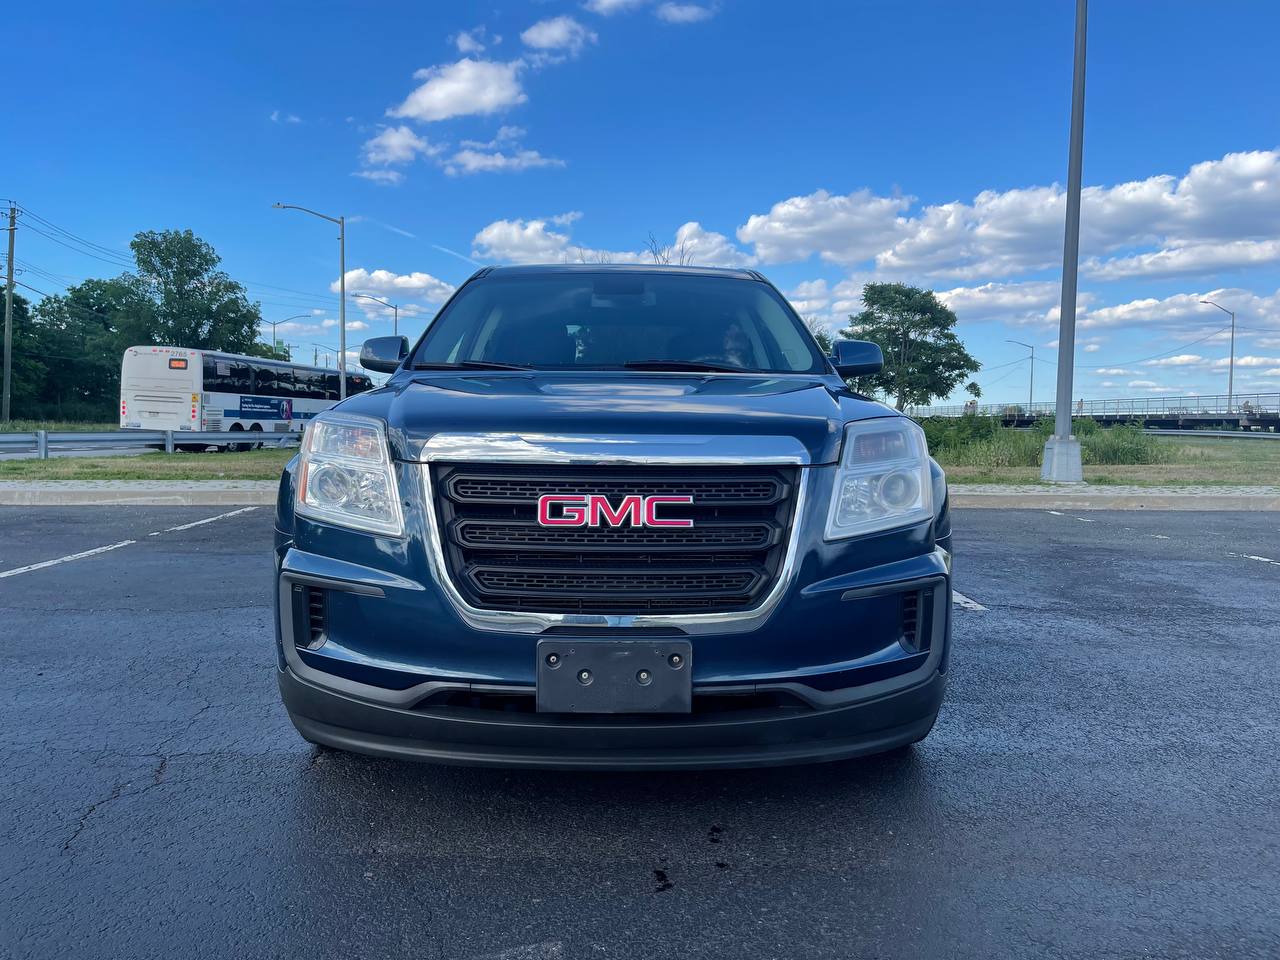 Used - GMC Terrain SLE SUV for sale in Staten Island NY